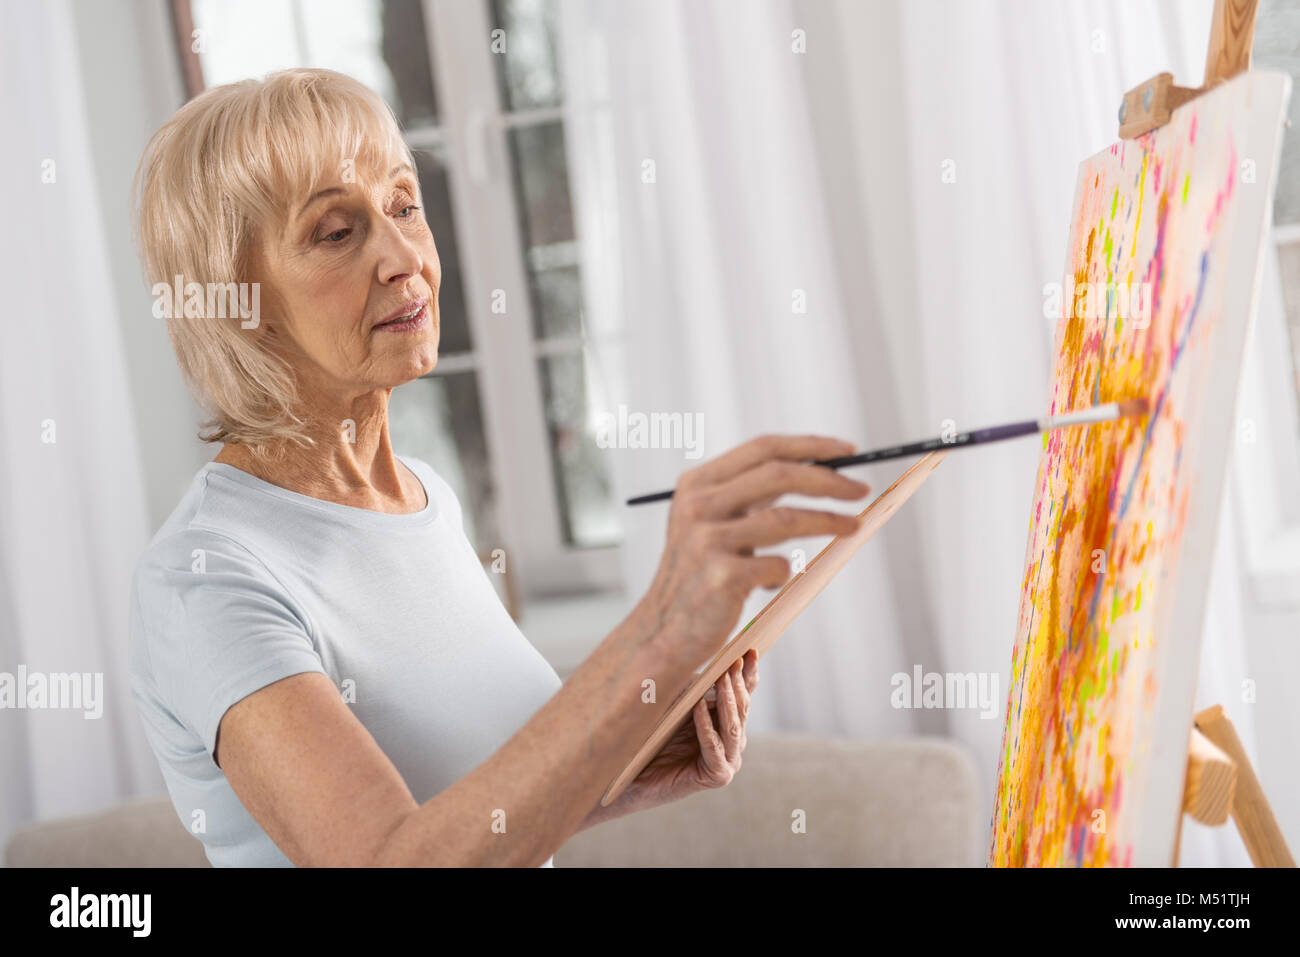 Talented mature woman involving in drawing Stock Photo